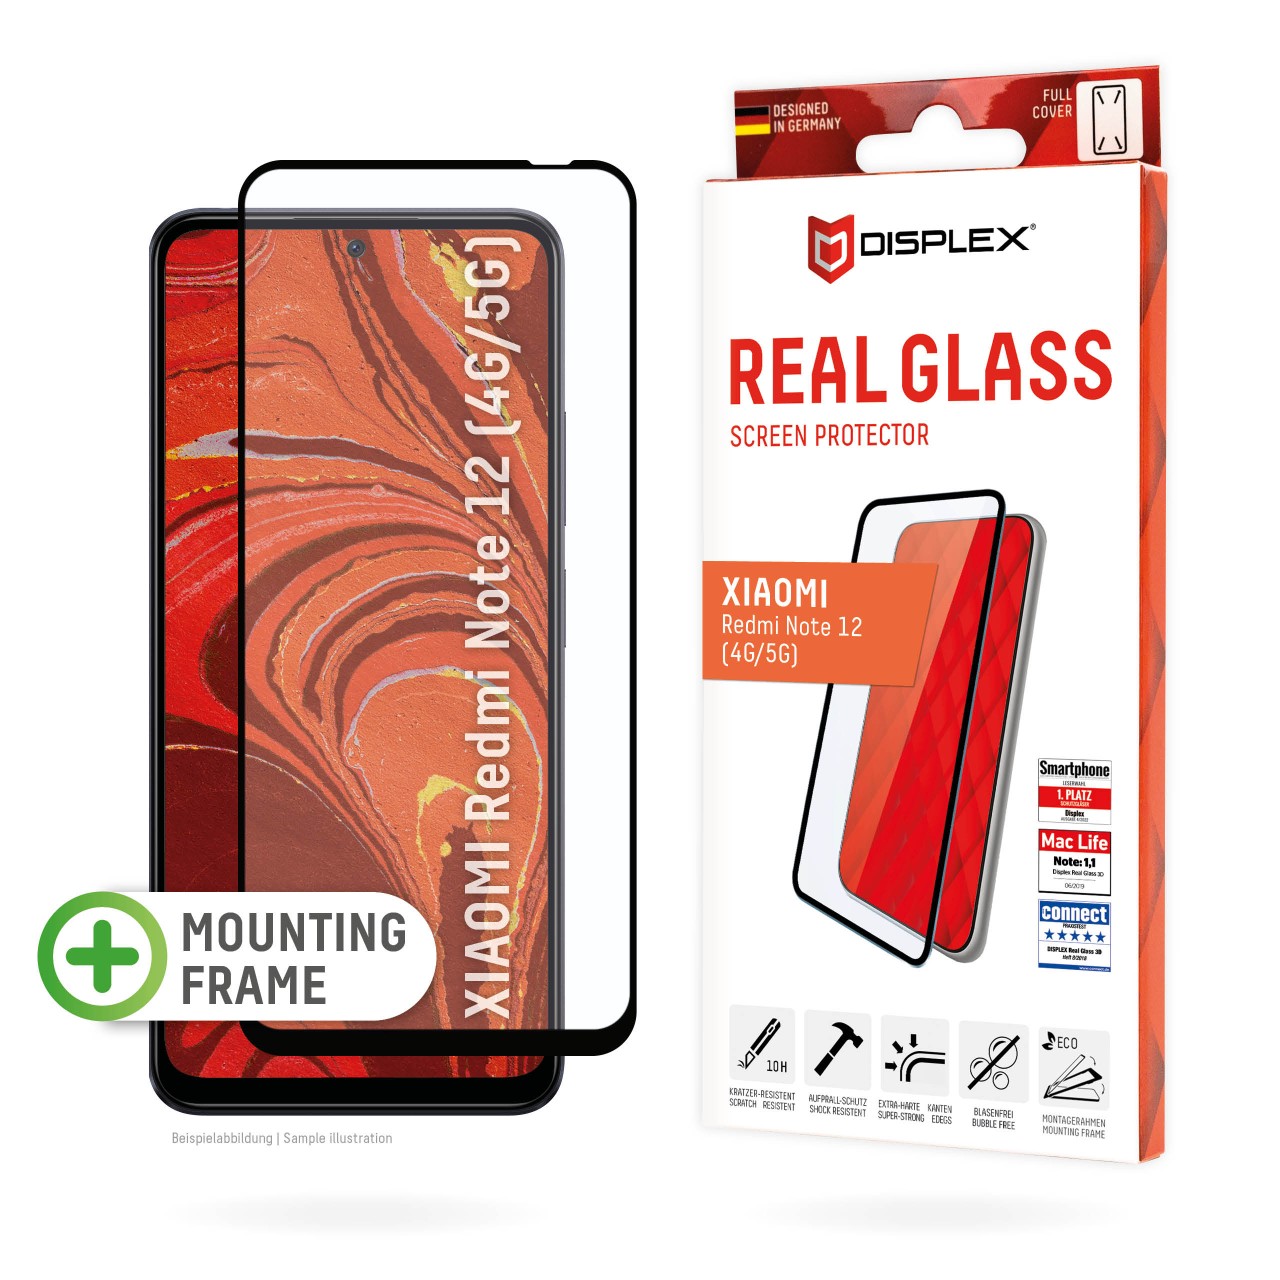 Real Glass for Samsung Galaxy A30/A30s/A50/A50s (6,4"), Full Cover